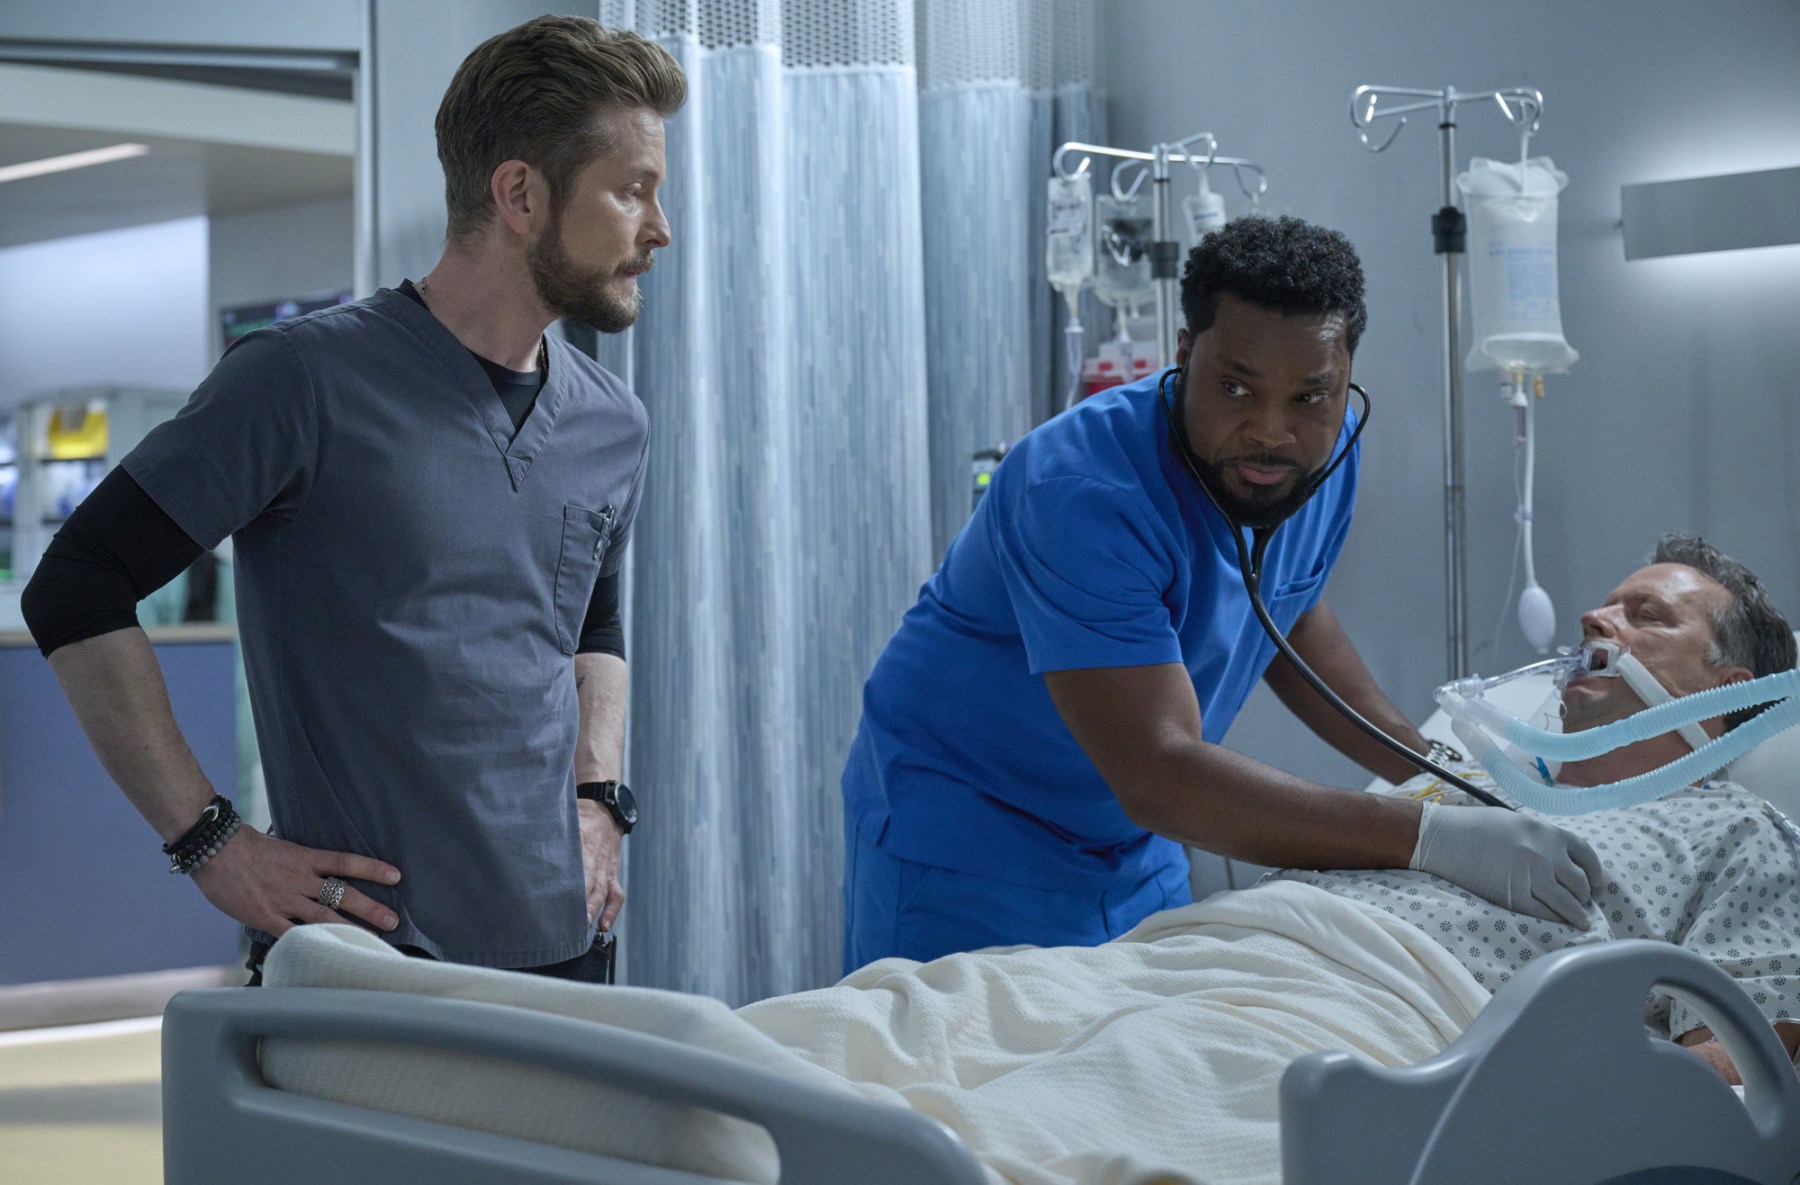 THE RESIDENT: L-R: Matt Czuchry, Malcolm-Jamal Warner and guest star Steven Culp in the "All Hands on Deck" season finale episode of THE RESIDENT airing Tuesday, Jan. 17 (8:00-9:00 PM ET/PT) on FOX. ©2022 Fox Media LLC. CR: Tom Griscom/FOX